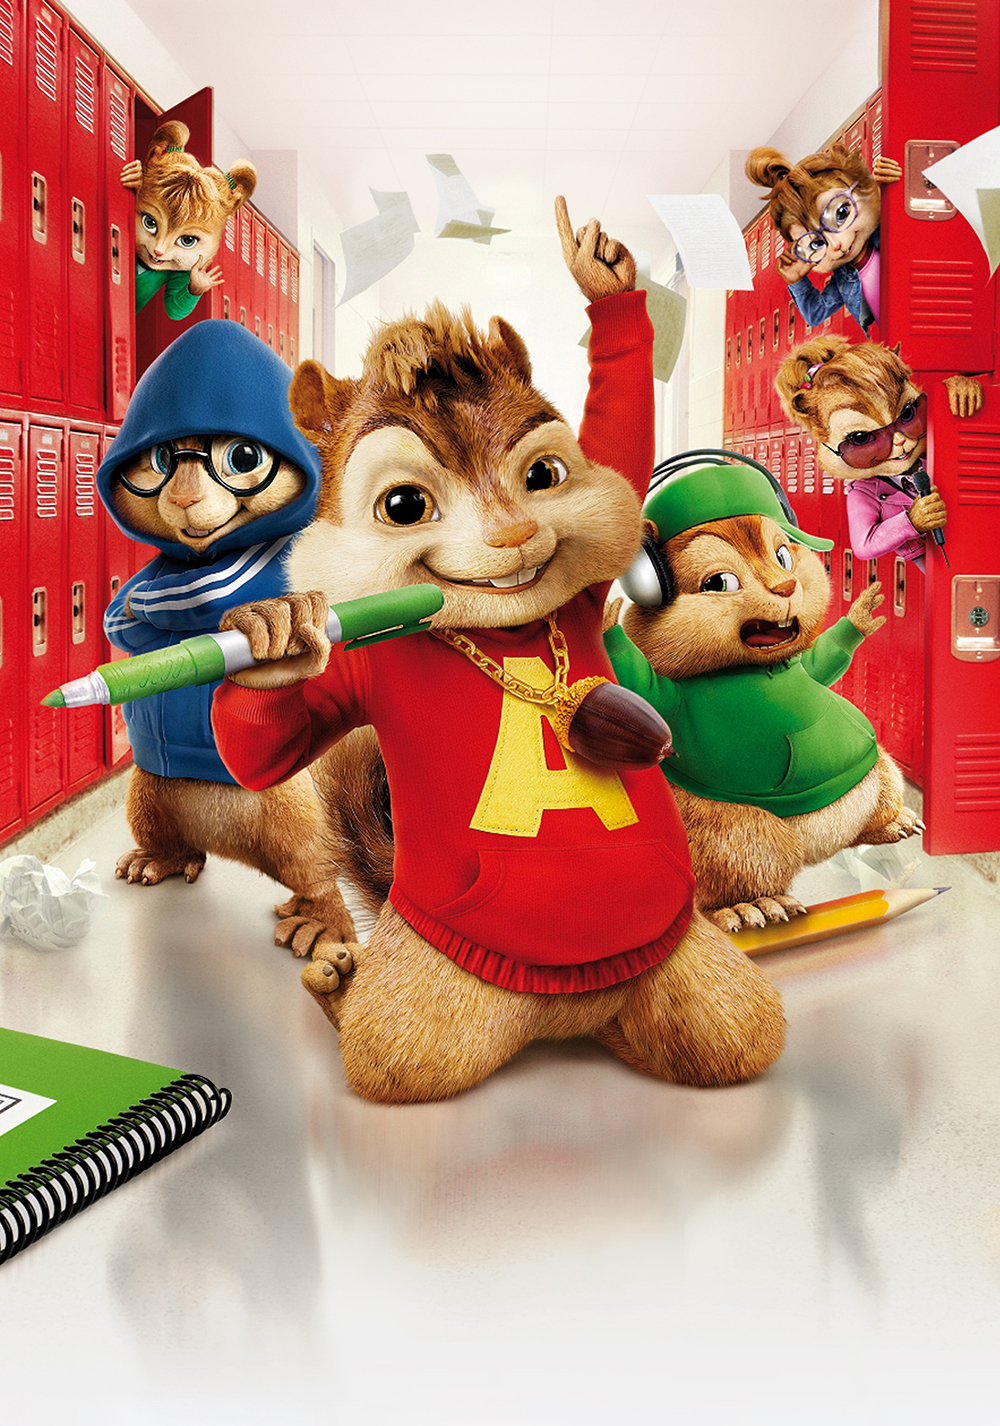 Alvin and the Chipmunks: The Squeakquel Picture